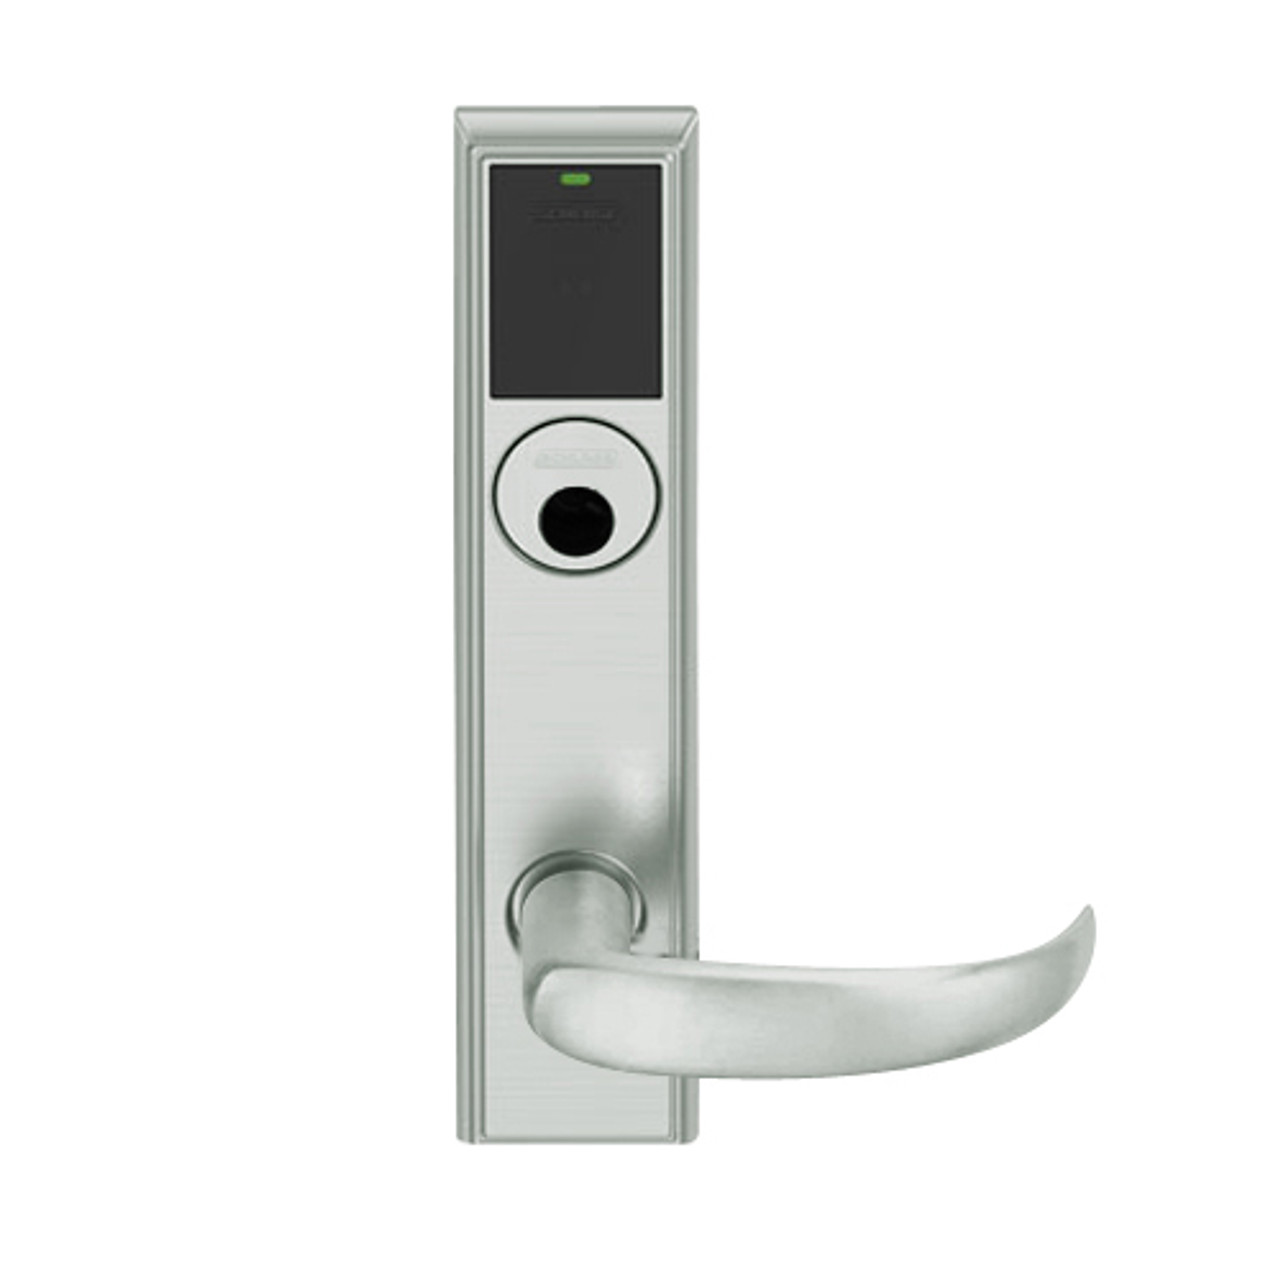 LEMD-ADD-L-17-619 Schlage Less Mortise Cylinder Privacy/Apartment Wireless Addison Mortise Deadbolt Lock with LED and Sparta Lever in Satin Nickel